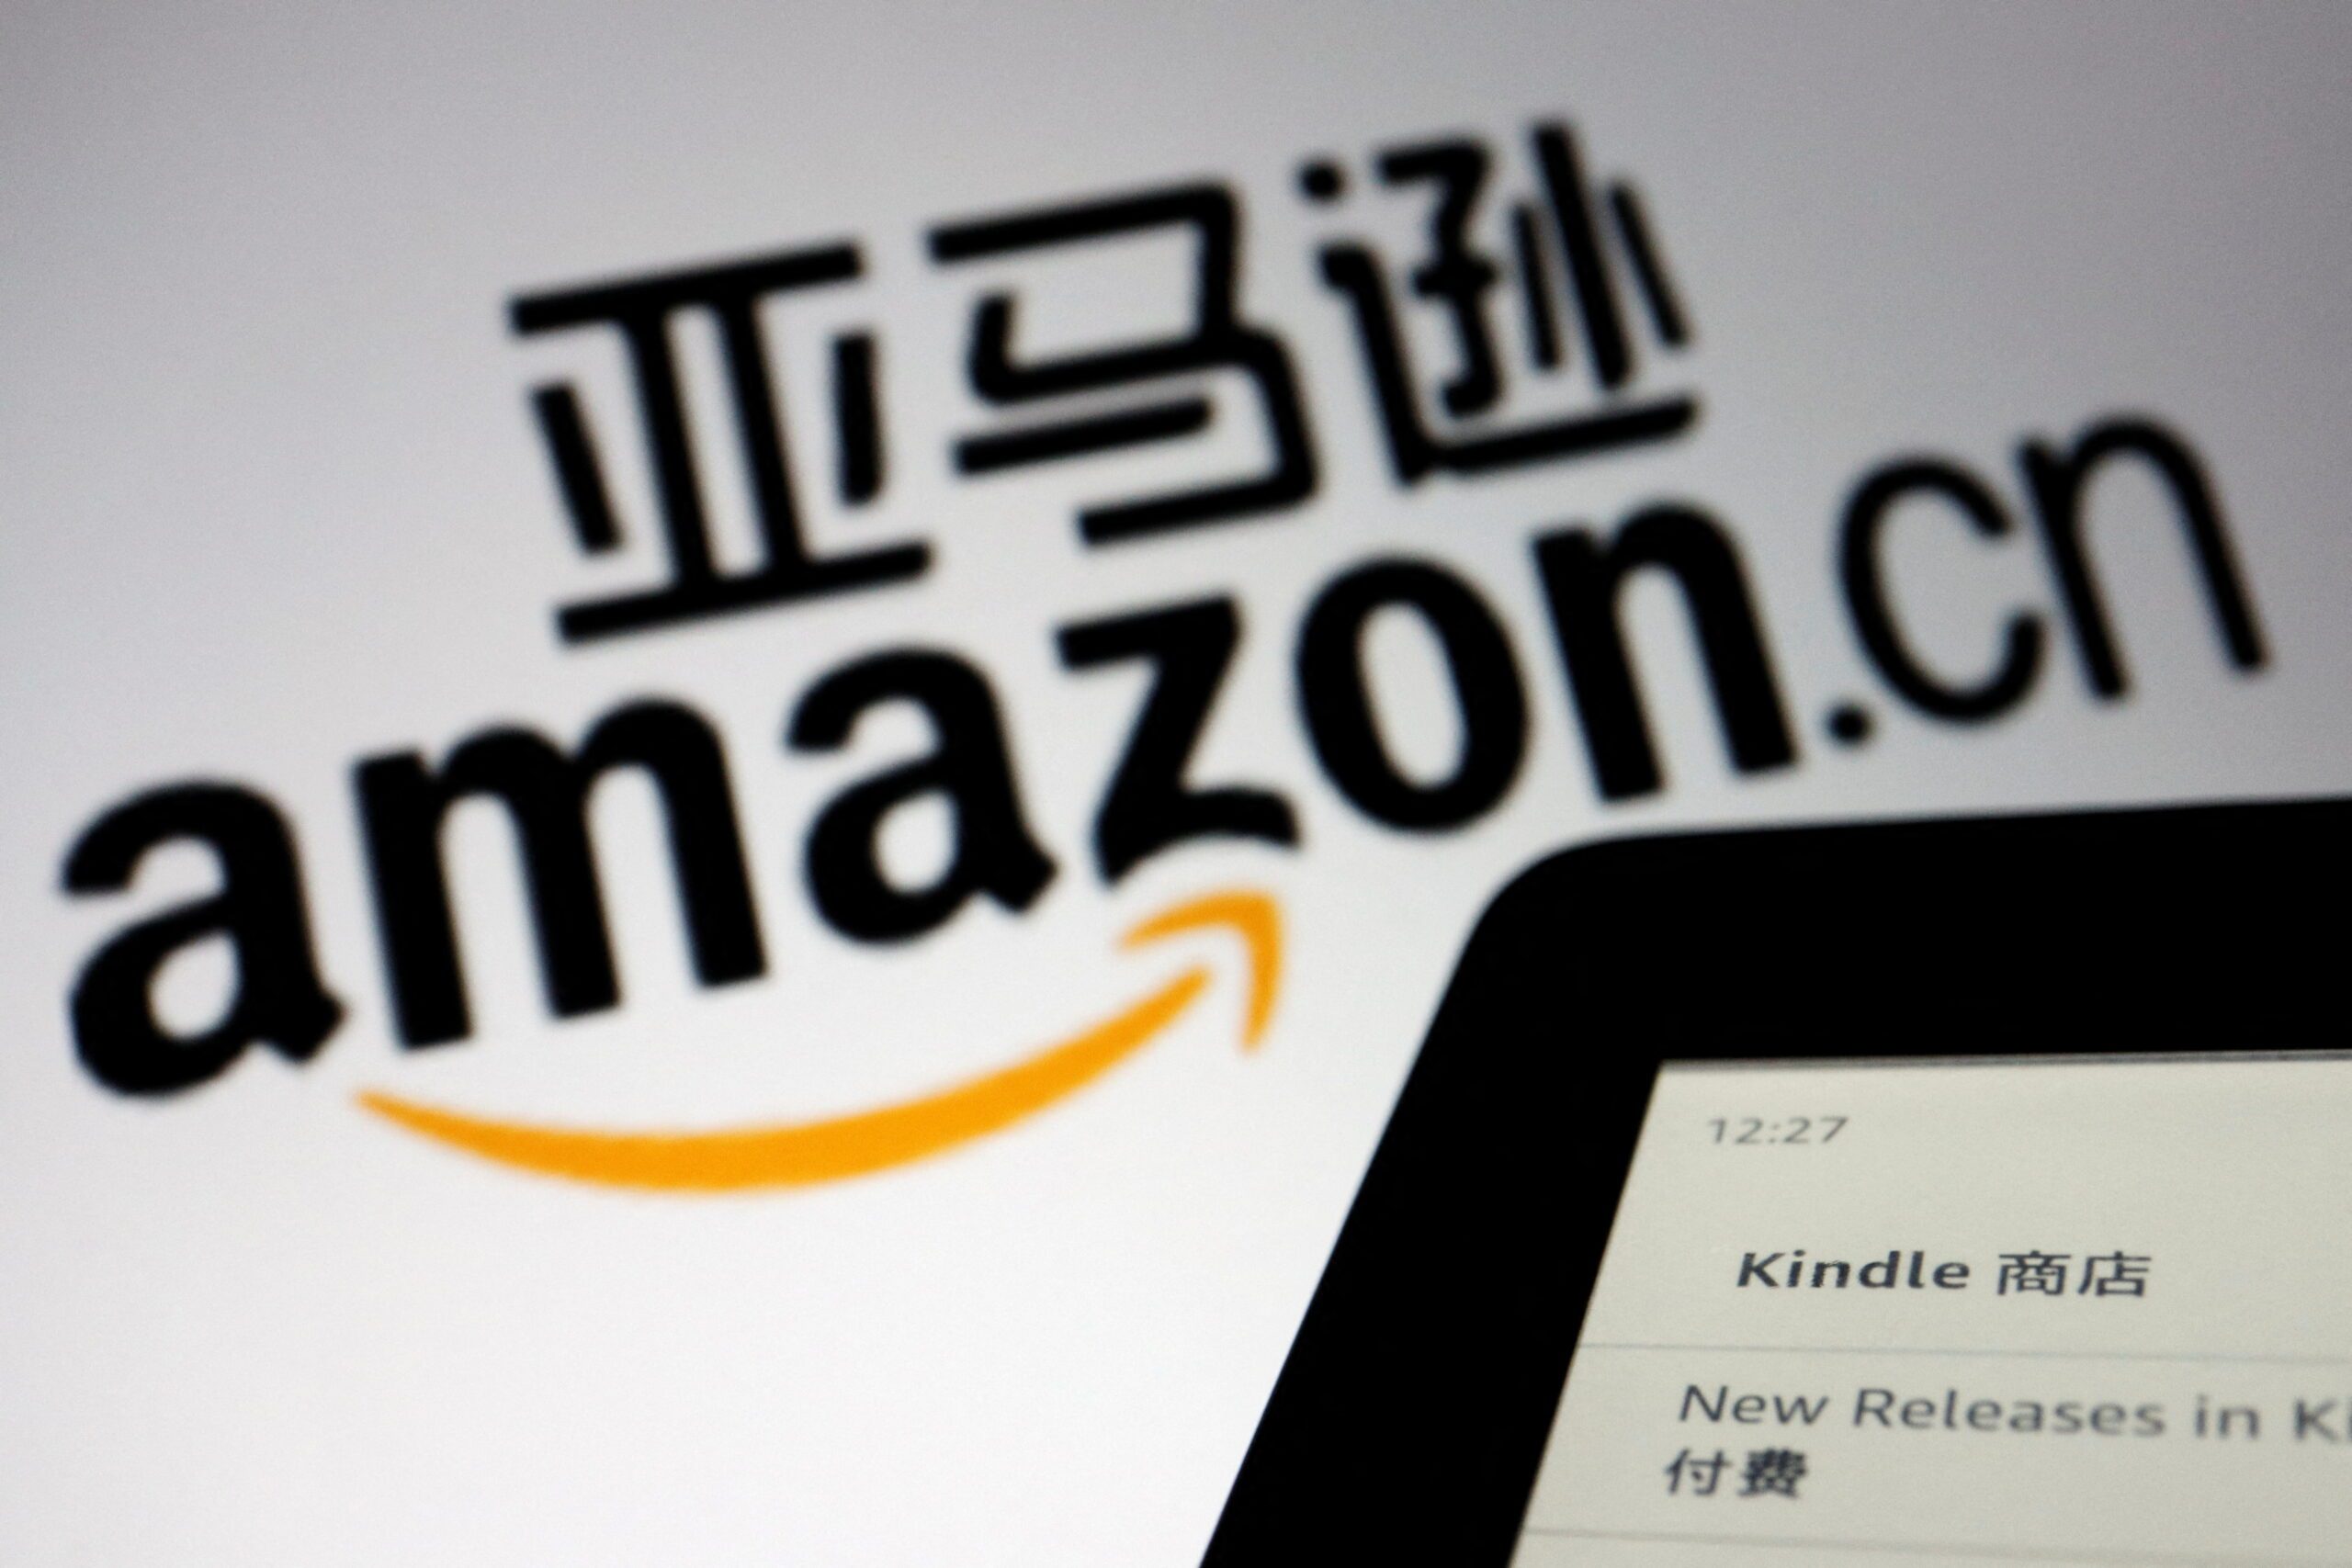 Amazon partnered with China propaganda arm to win Beijing’s favor, document shows